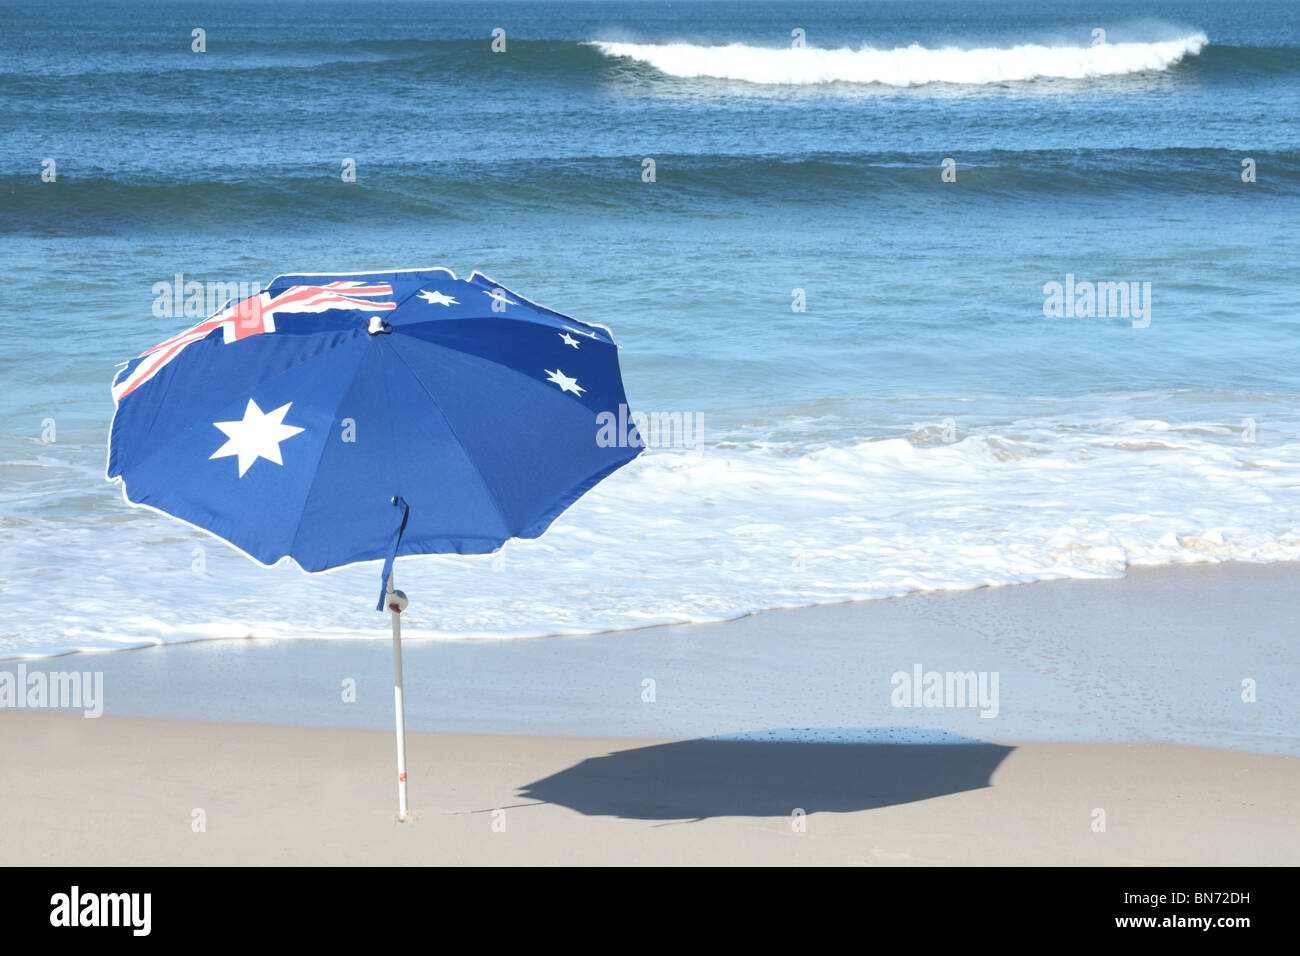 single Australian umbrella on a white sandy beach with a breaking wave in the back gound Stock Photo